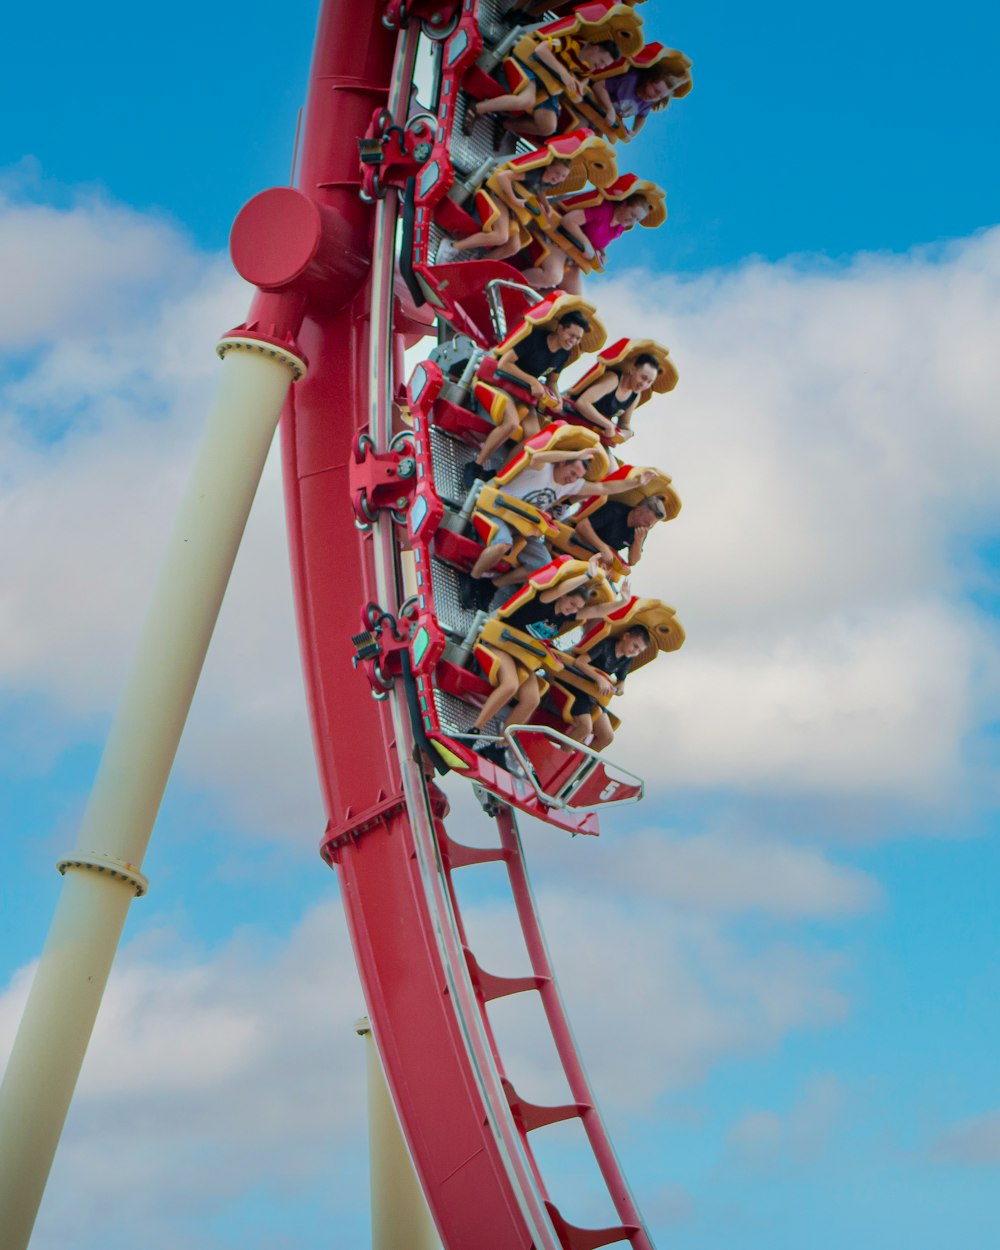 Free Images : track, adventure, amusement park, action, speed, thrill,  leisure, roller coaster, loop, amusement ride, outdoor recreation,  nonbuilding structure 2816x2112 - - 936404 - Free stock photos - PxHere